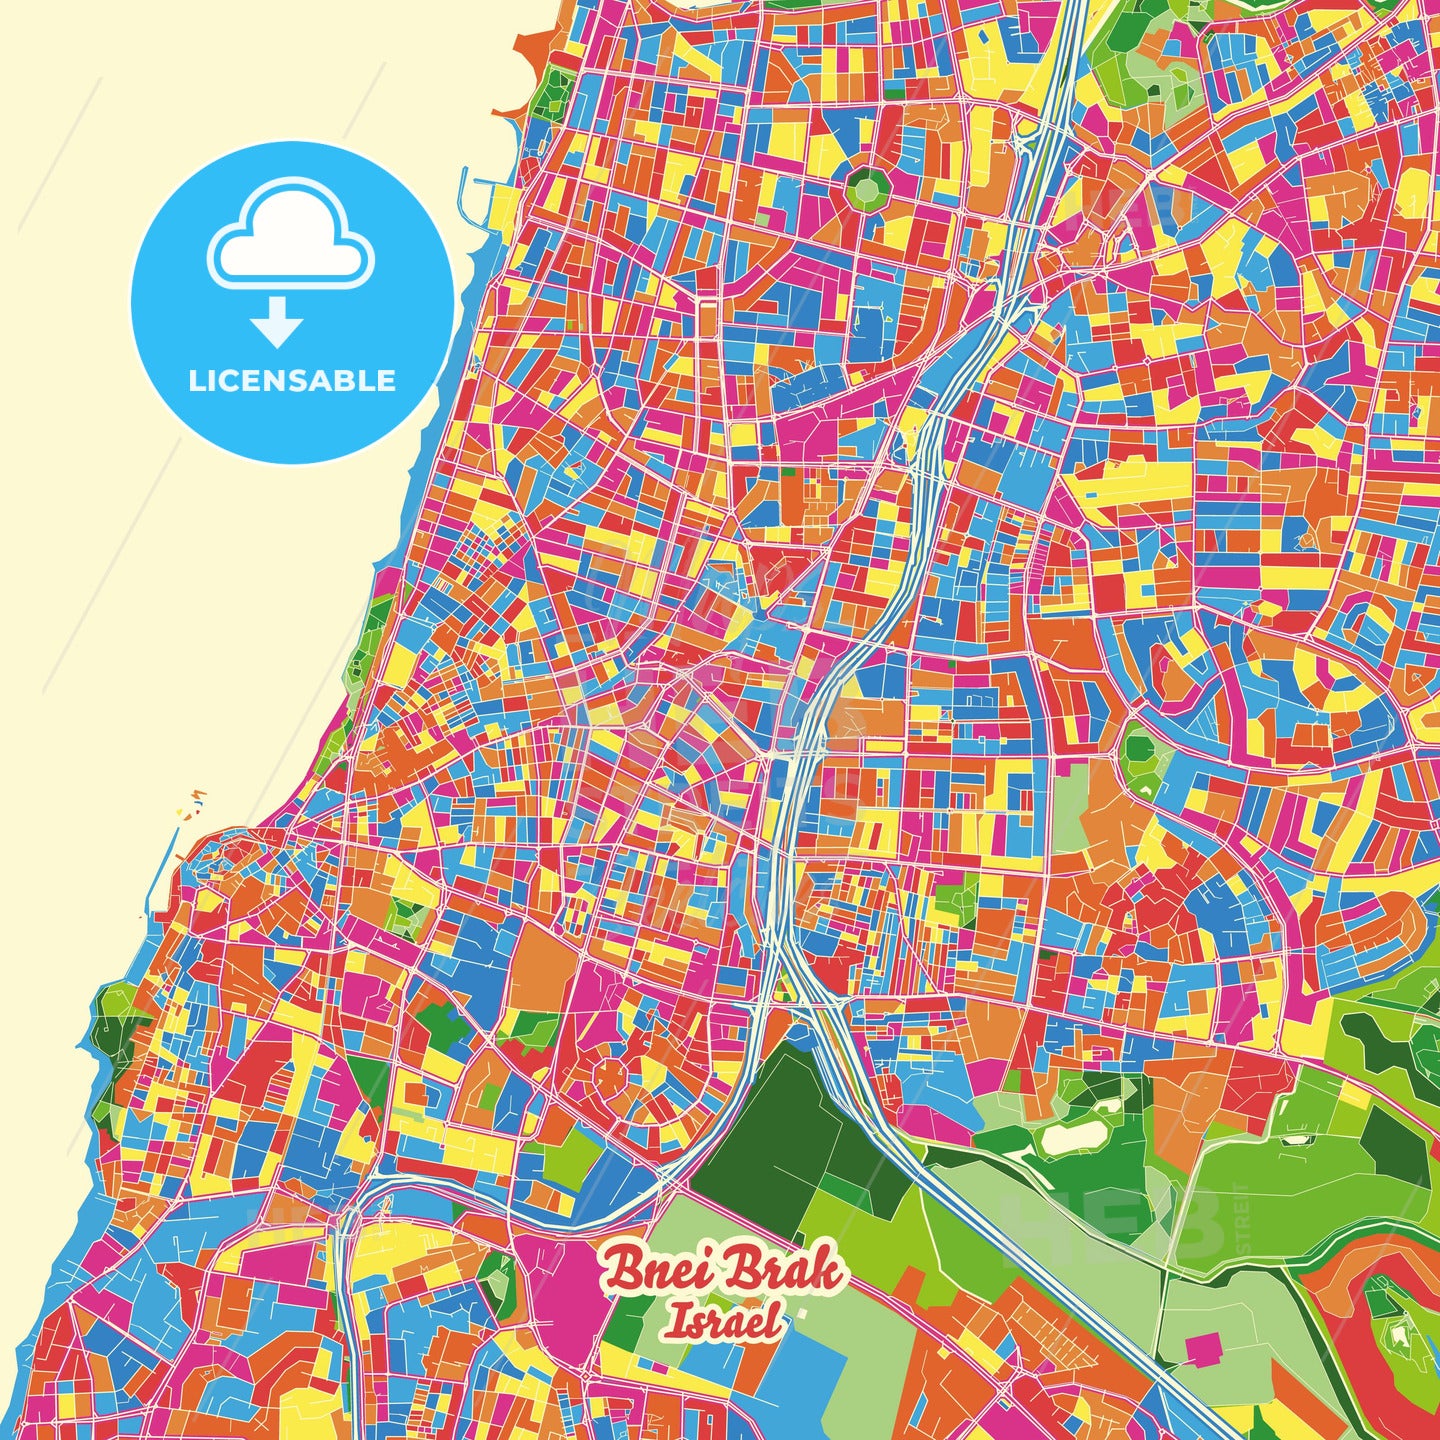 Bnei Brak, Israel Crazy Colorful Street Map Poster Template - HEBSTREITS Sketches